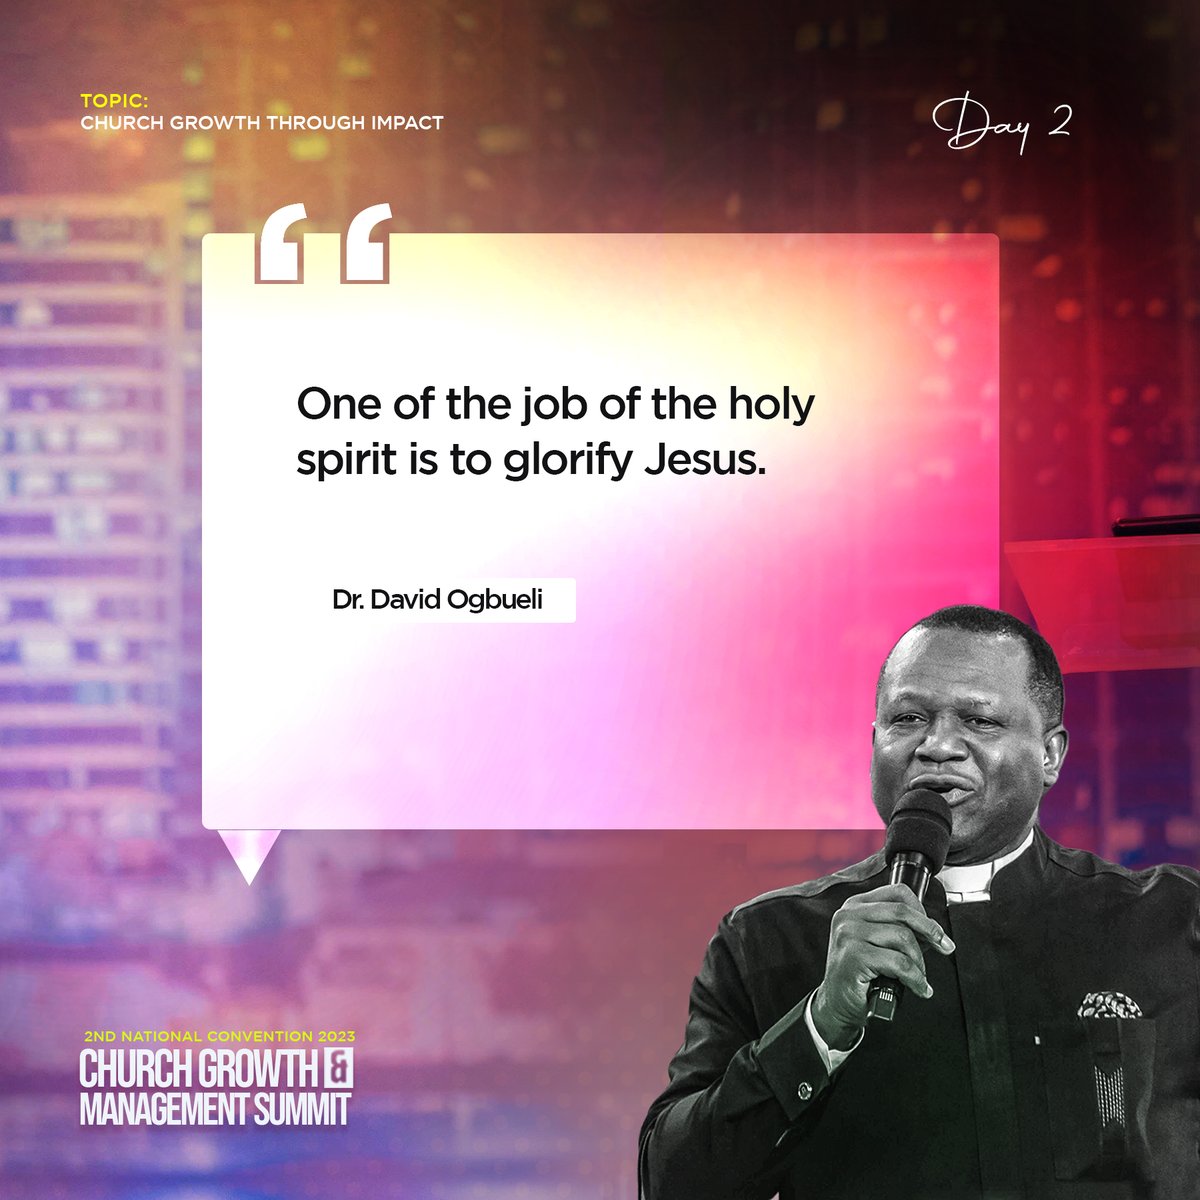 Nuggets from the ongoing Church Growth and Management summit.

#pastordavidogbueli
#dominioncity
#globalmissionnetwork
#globalmission
#managementsummit